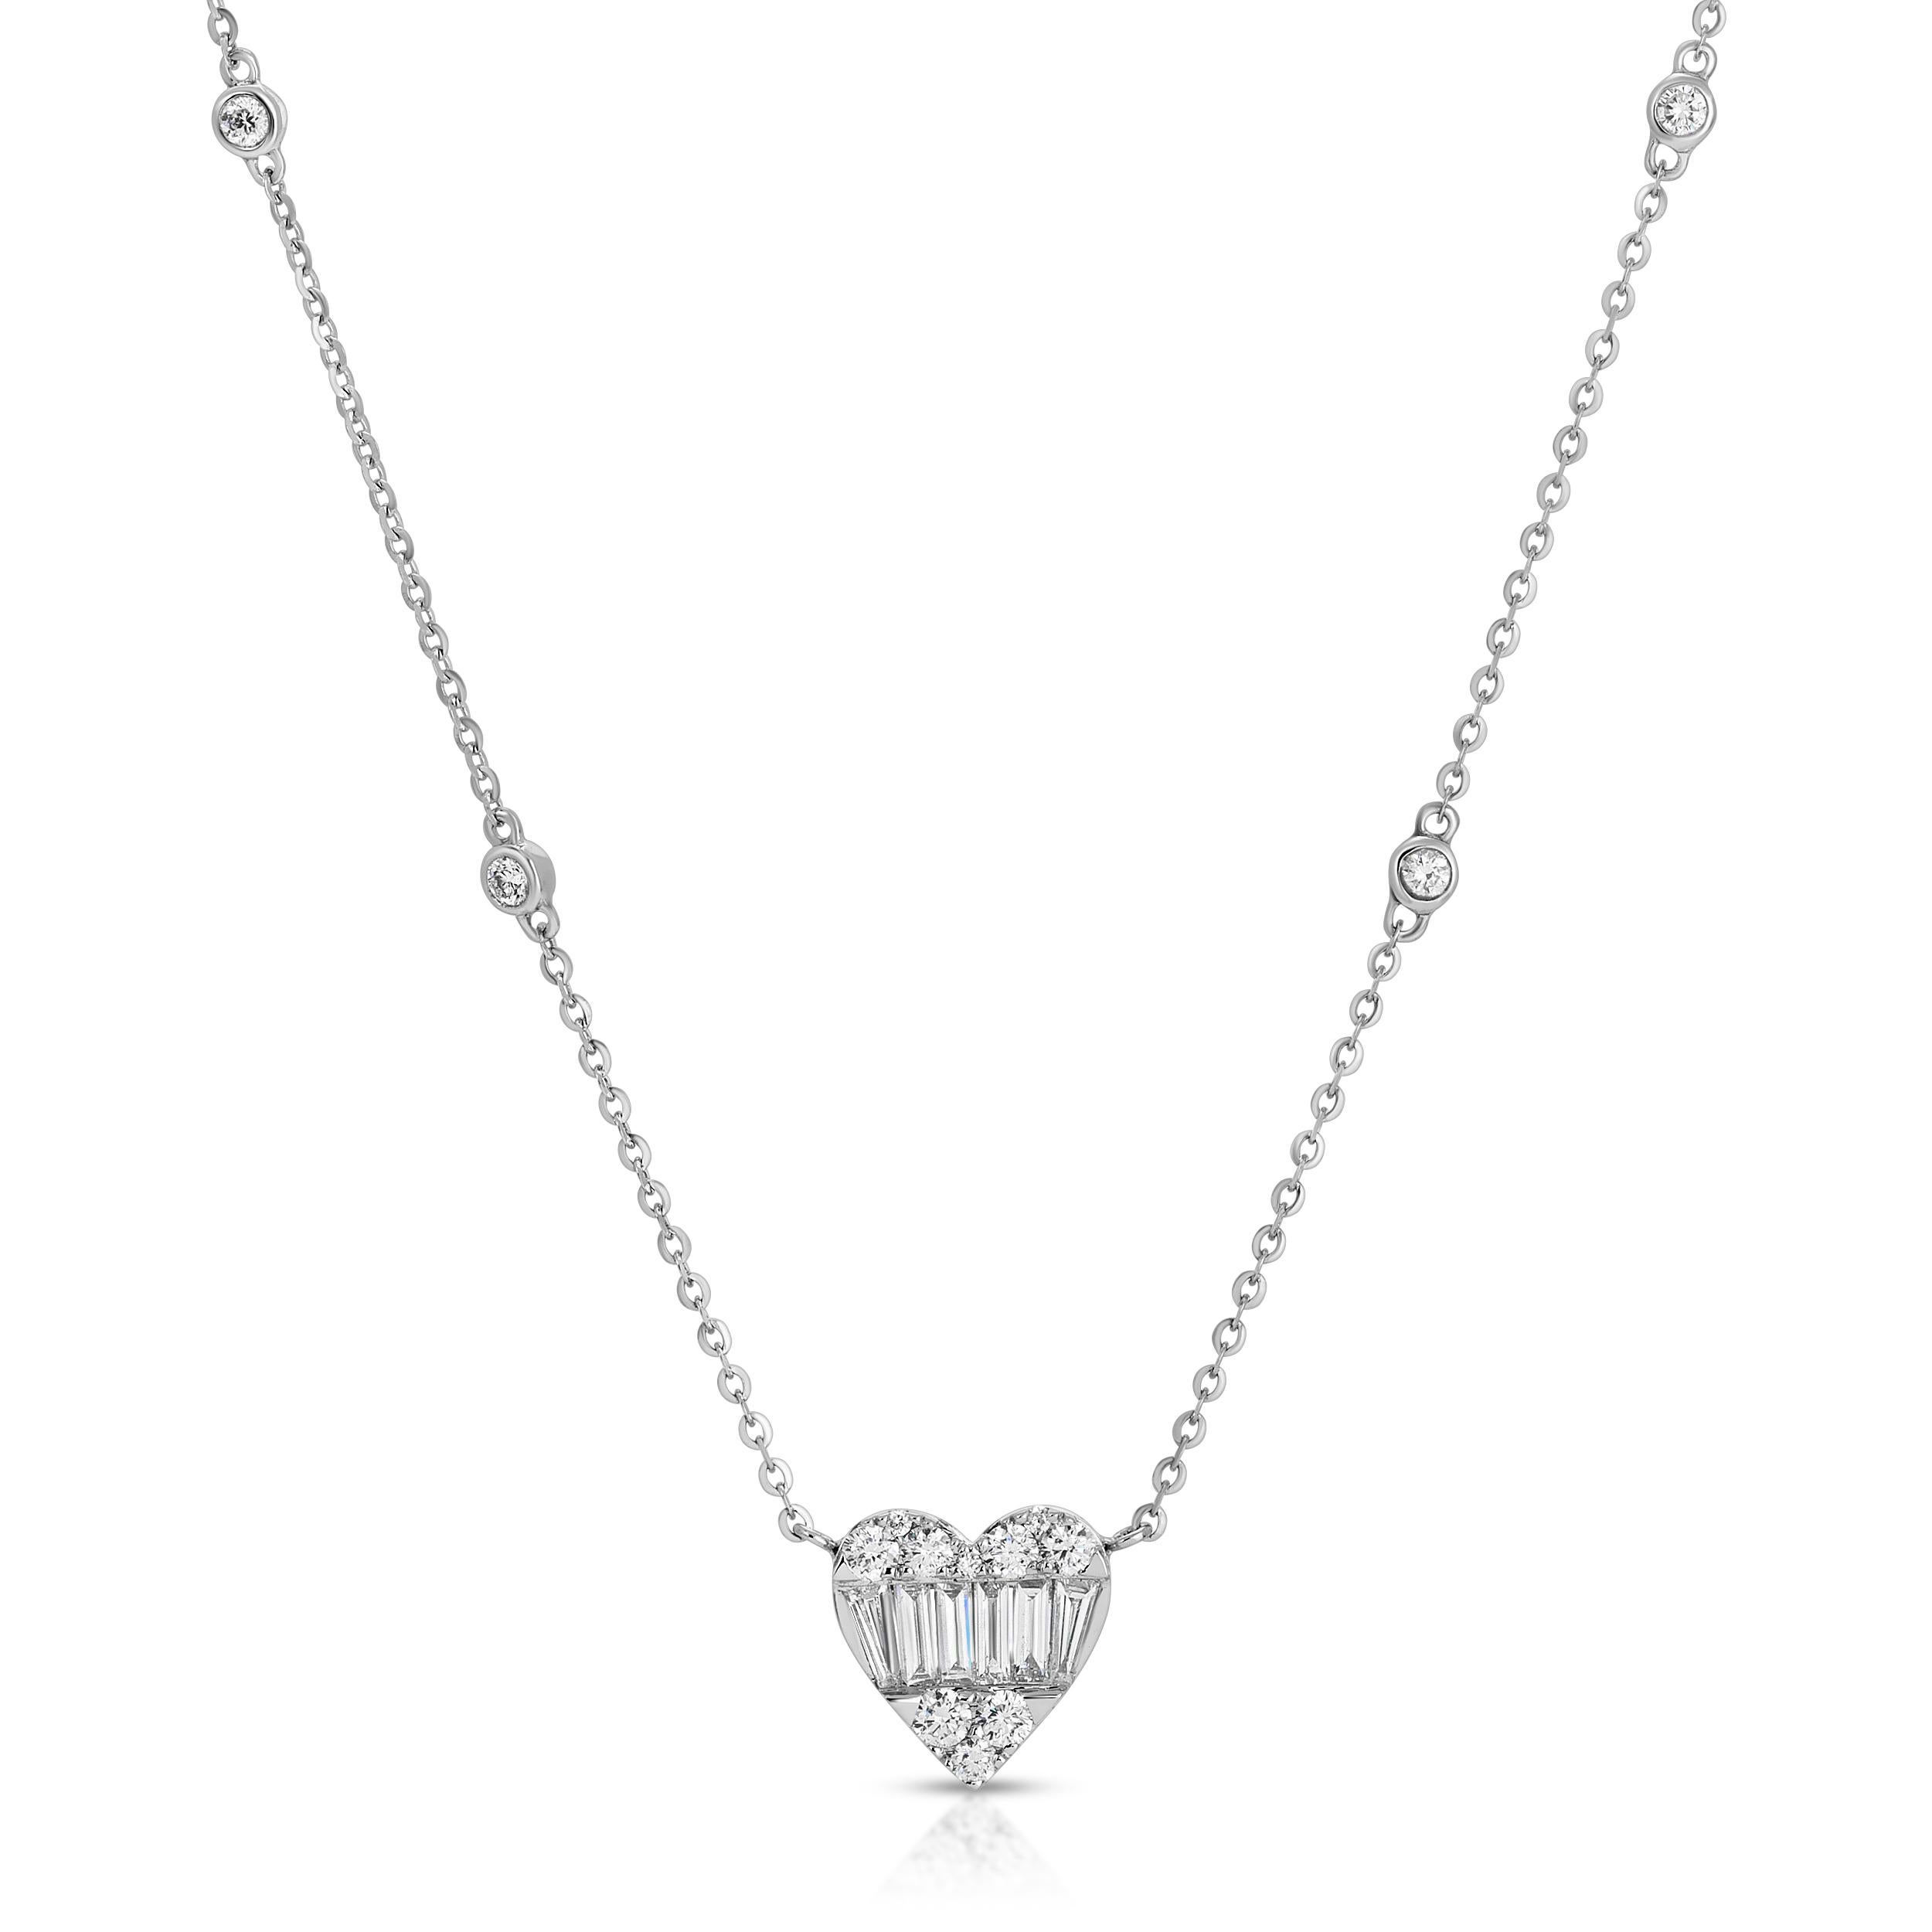 This exquisite necklace is the perfect expression of love and luxury. Whether it's a gift for yourself or a cherished one, it's a statement piece that radiates beauty and emotion. Celebrate love and elevate your style with our 18K White Gold Diamond